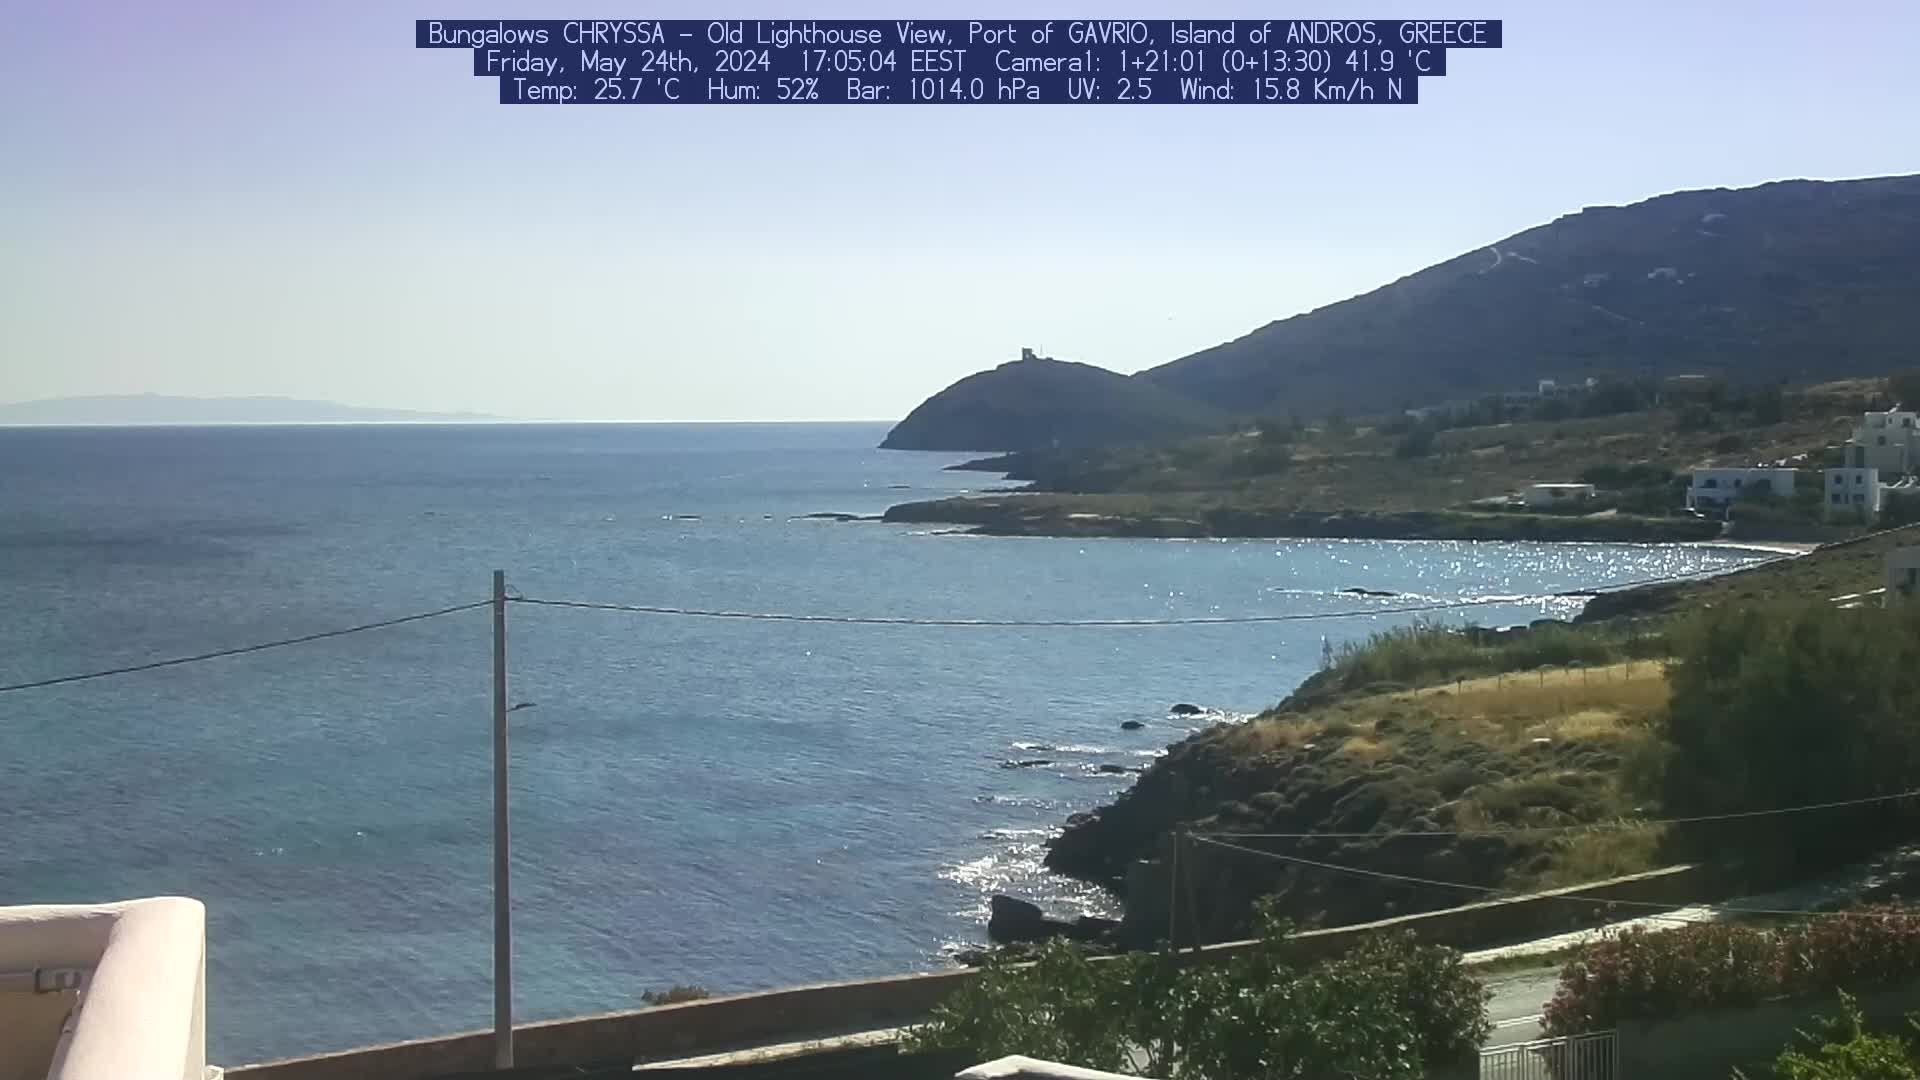 Gavrio (Andros) Wed. 17:05